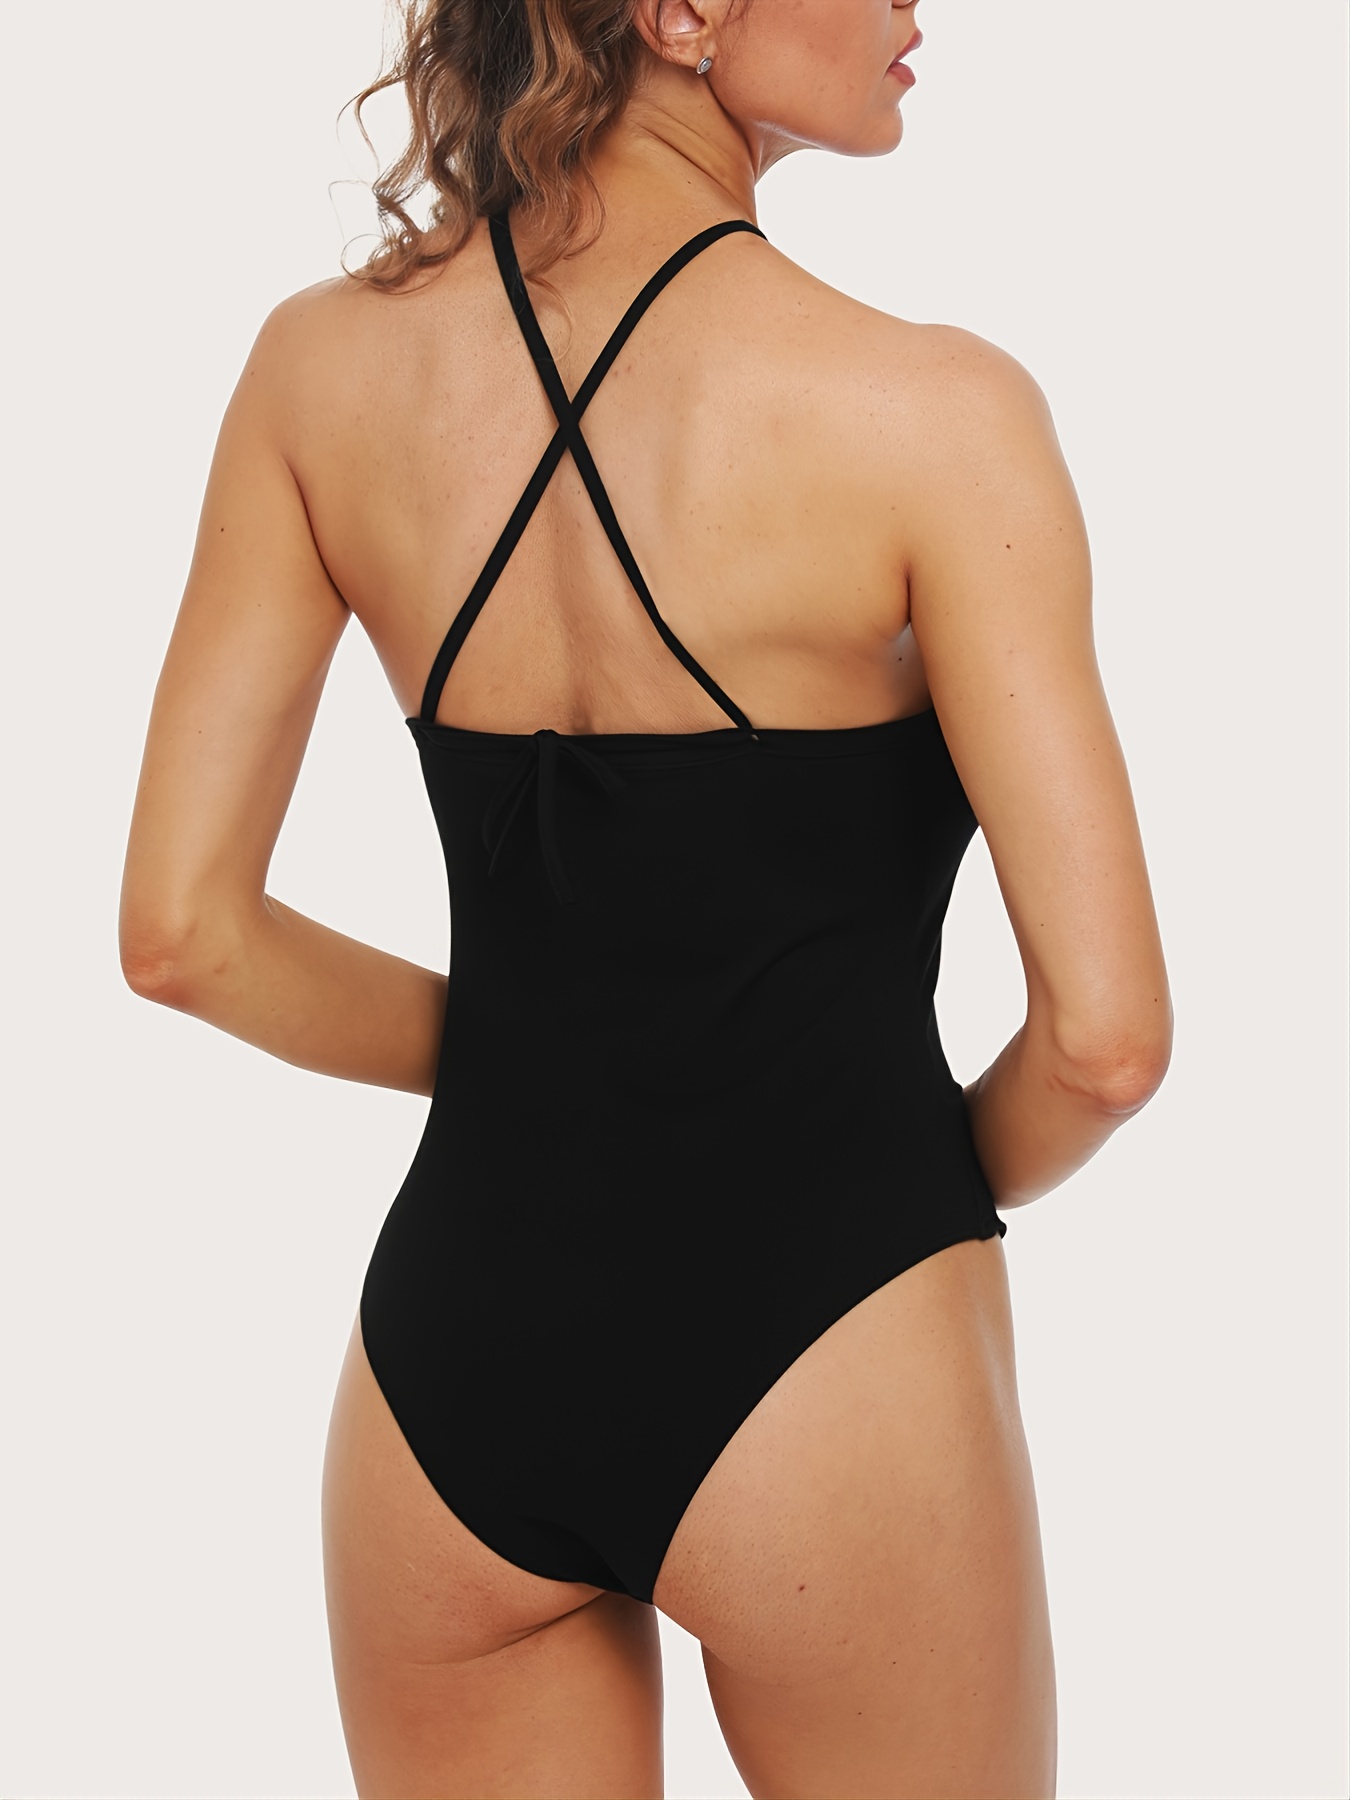 Autunm 2022 Nude One Piece Shapewear Romper Sleeveless, Deep V Neck, Slim  Fit, Empire Waist, Perfect For Spring/Summer Clubwear From Clothes0708,  $8.55